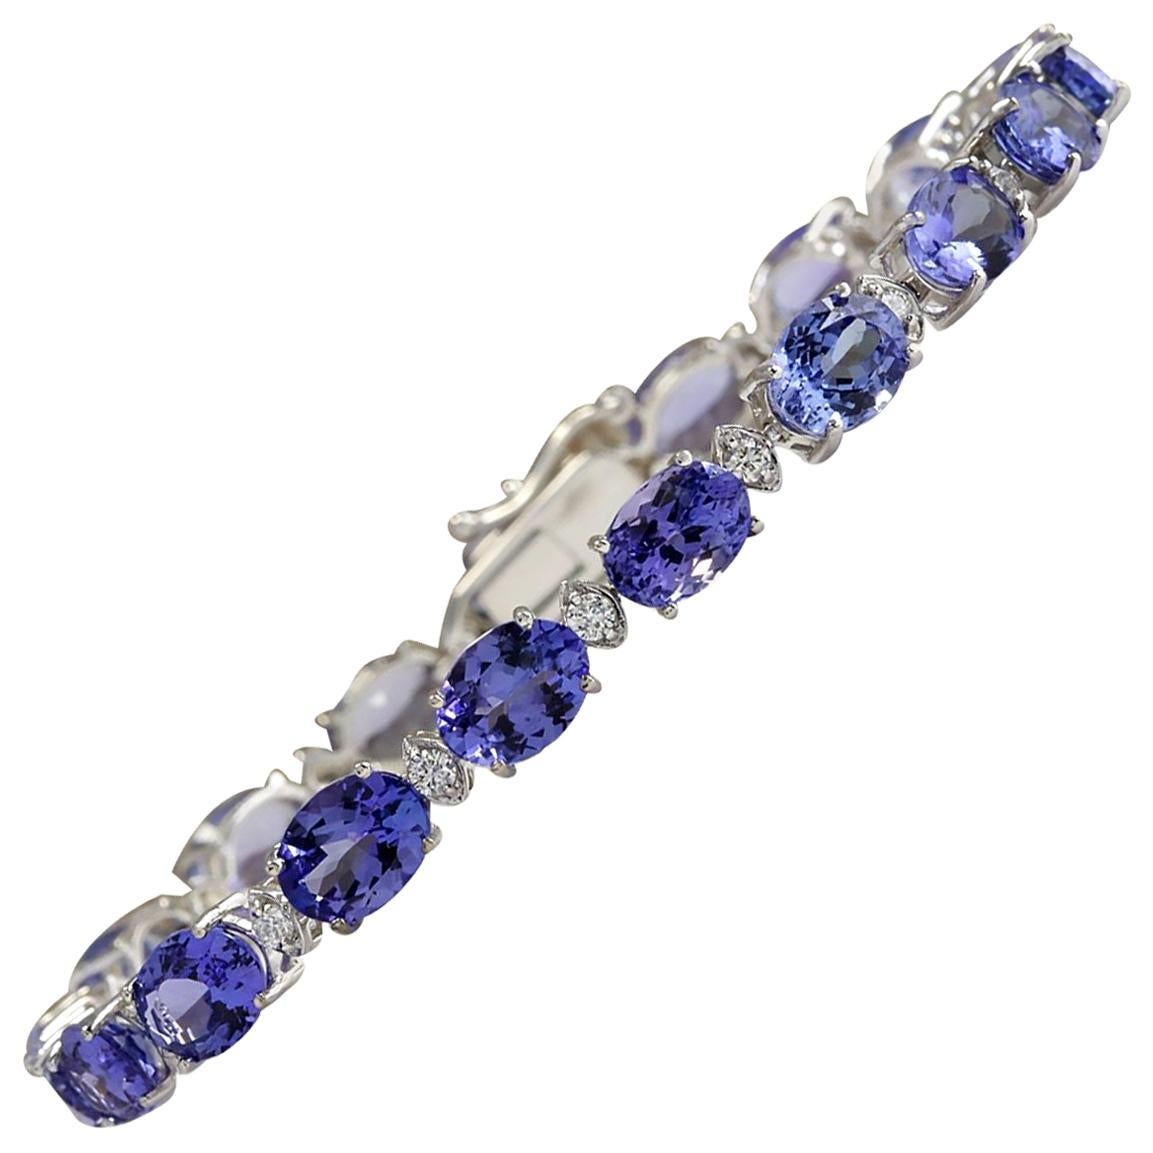 Stamped: 14K 
Total Bracelet Approx. Weight: 10.0 Grams
Bracelet Length: 7 Inches
Bracelet Width: 6 Millimeters
Total Tanzanite Weight: 22.65 Carat (Measures: 8.00x6.00 Millimeters)
Color: Blue
Total  Diamond Weight: 0.70 Carat
Color: F-G, Clarity: